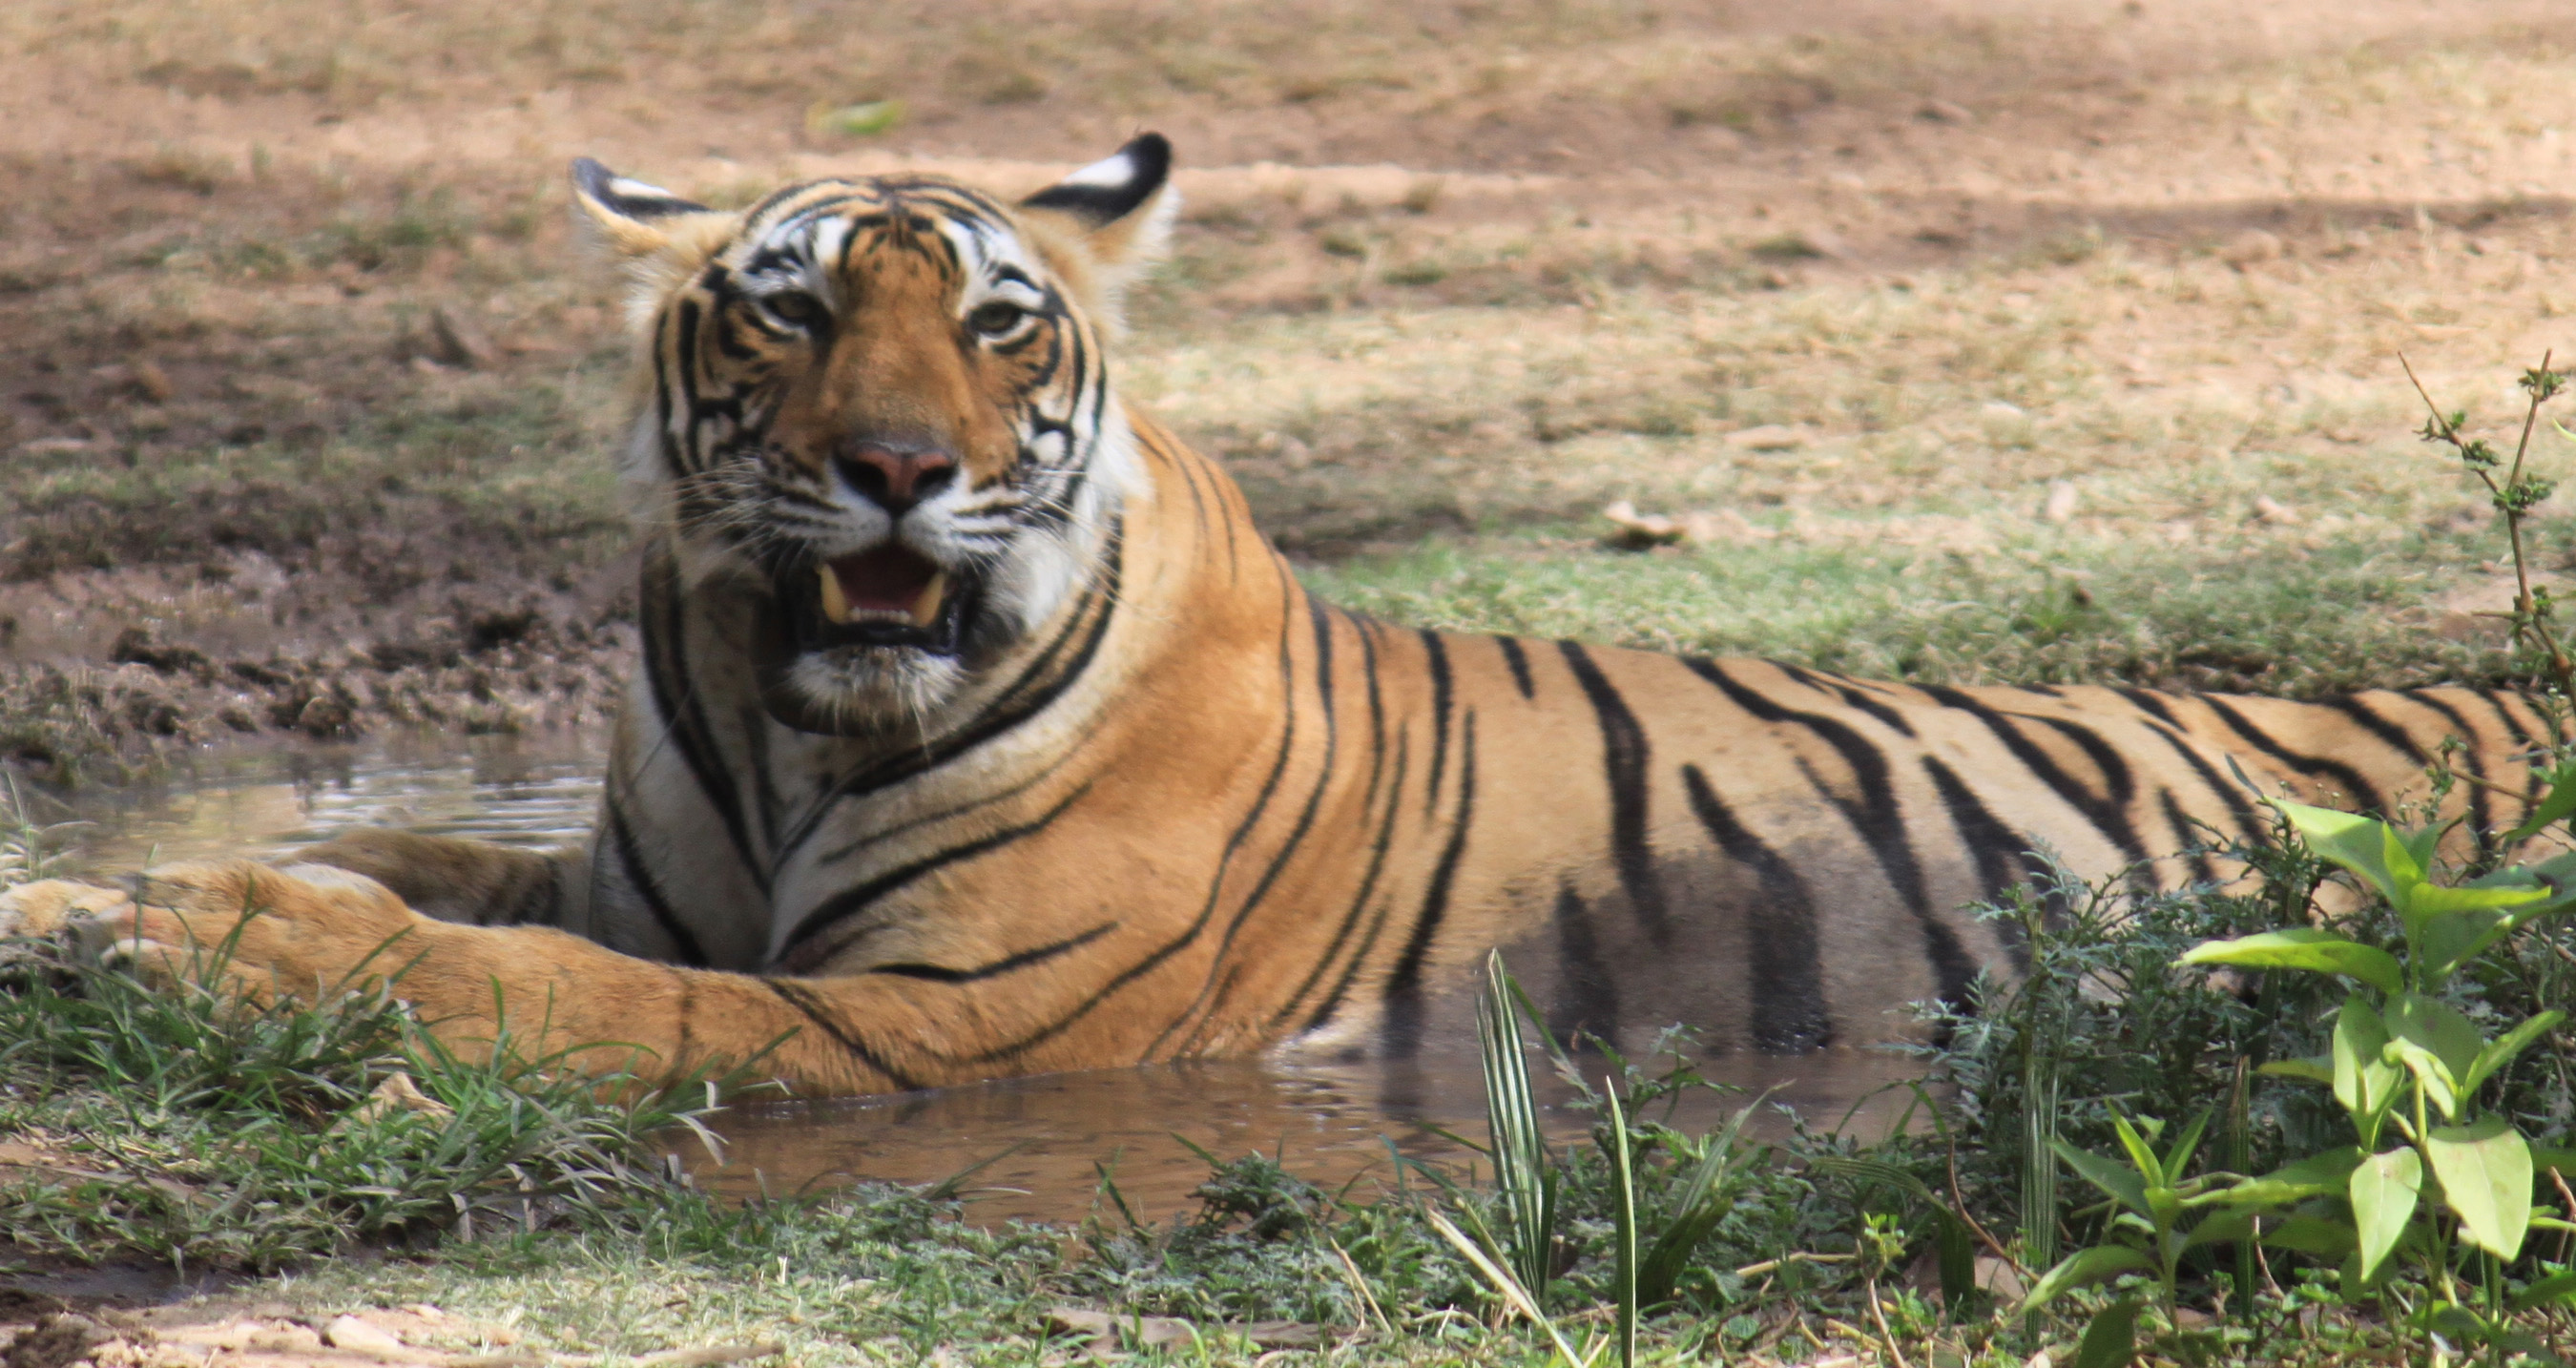 A tiger in Ranthambore national park